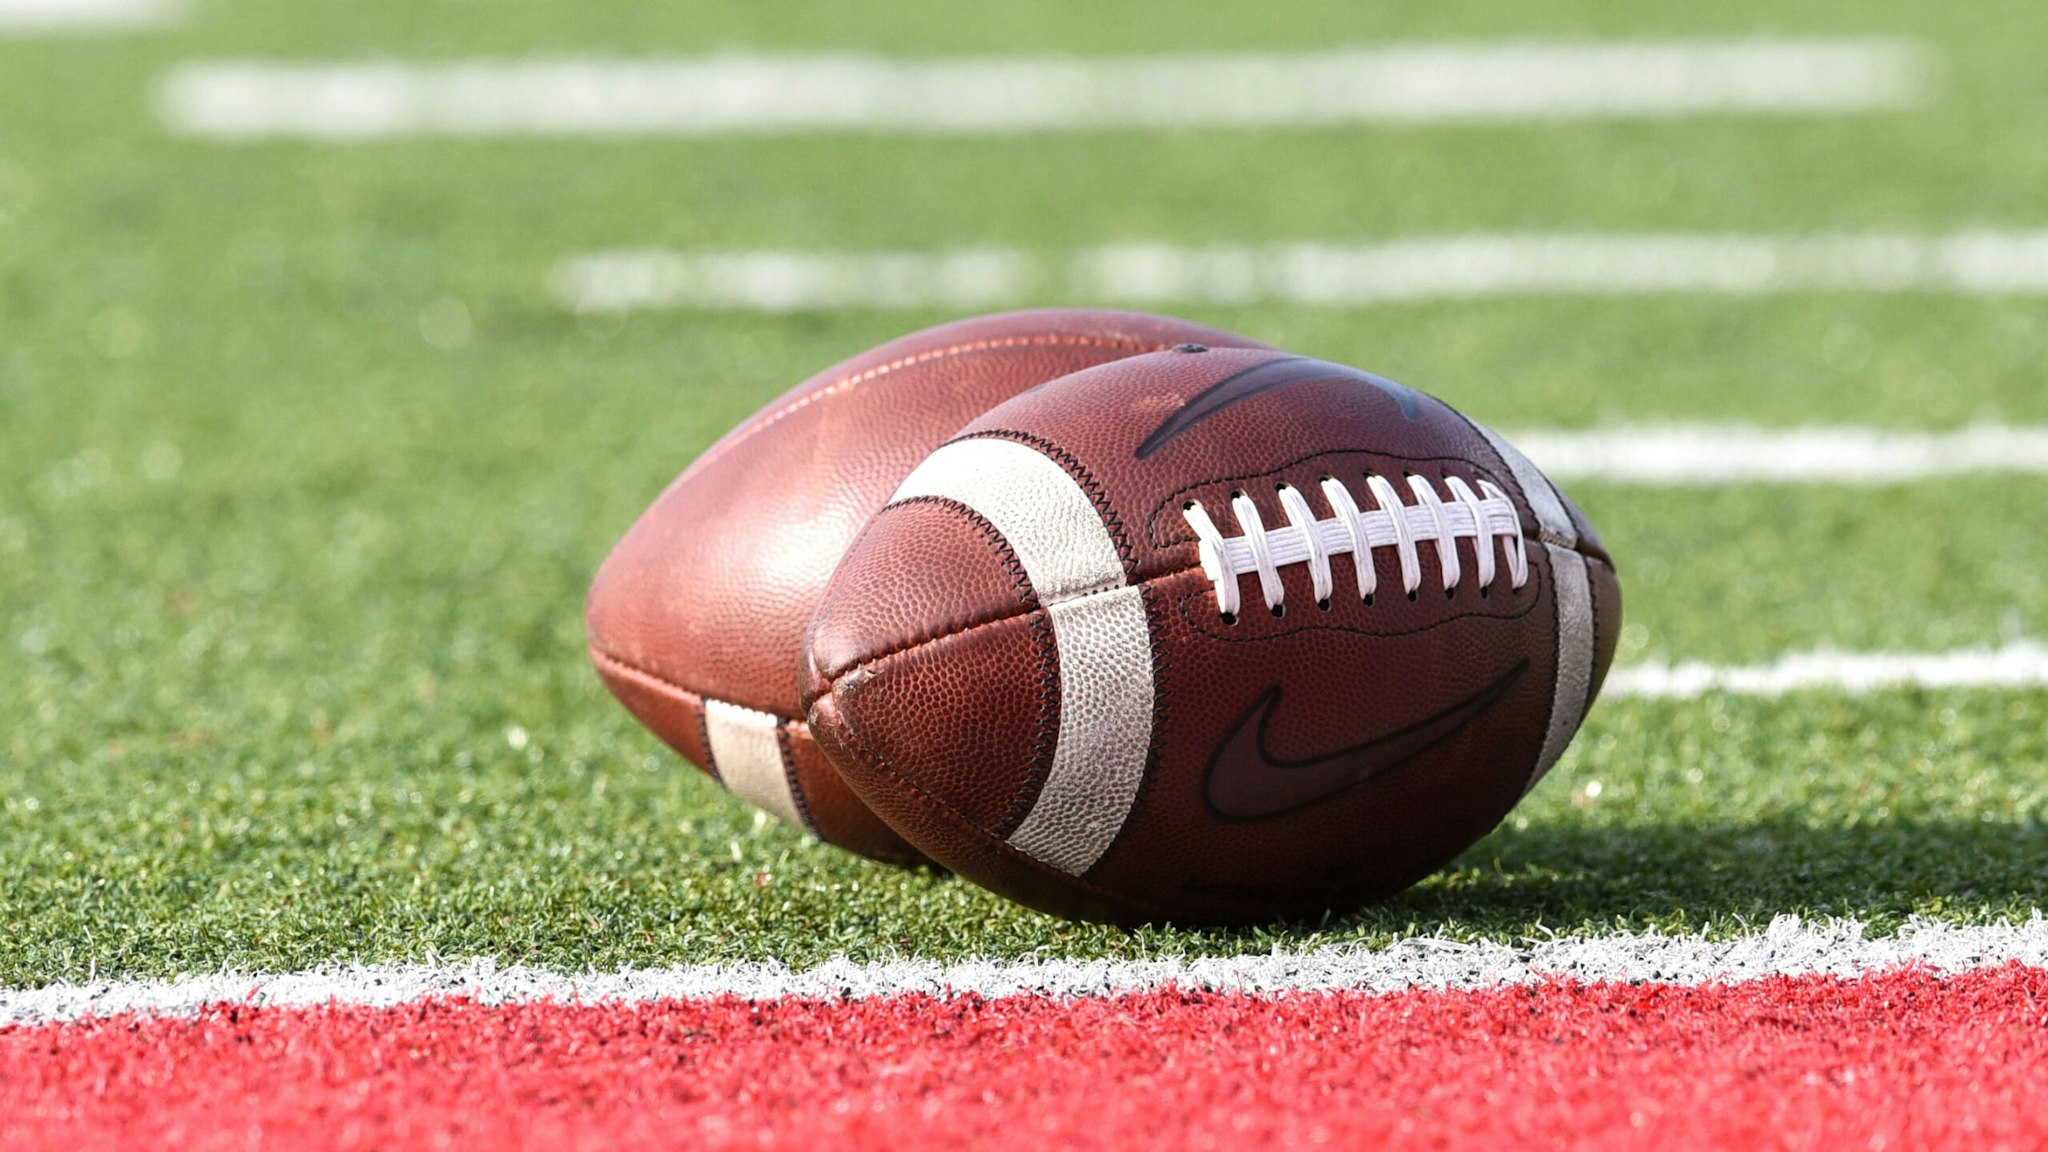 MUNCIE, IN - SEPTEMBER 02: Nike footballs sit on the goal line prior to a college football game between the Western Illinois Leathernecks and Ball State Cardinals on September 2, 2021 at Scheumann Stadium in Muncie, IN.